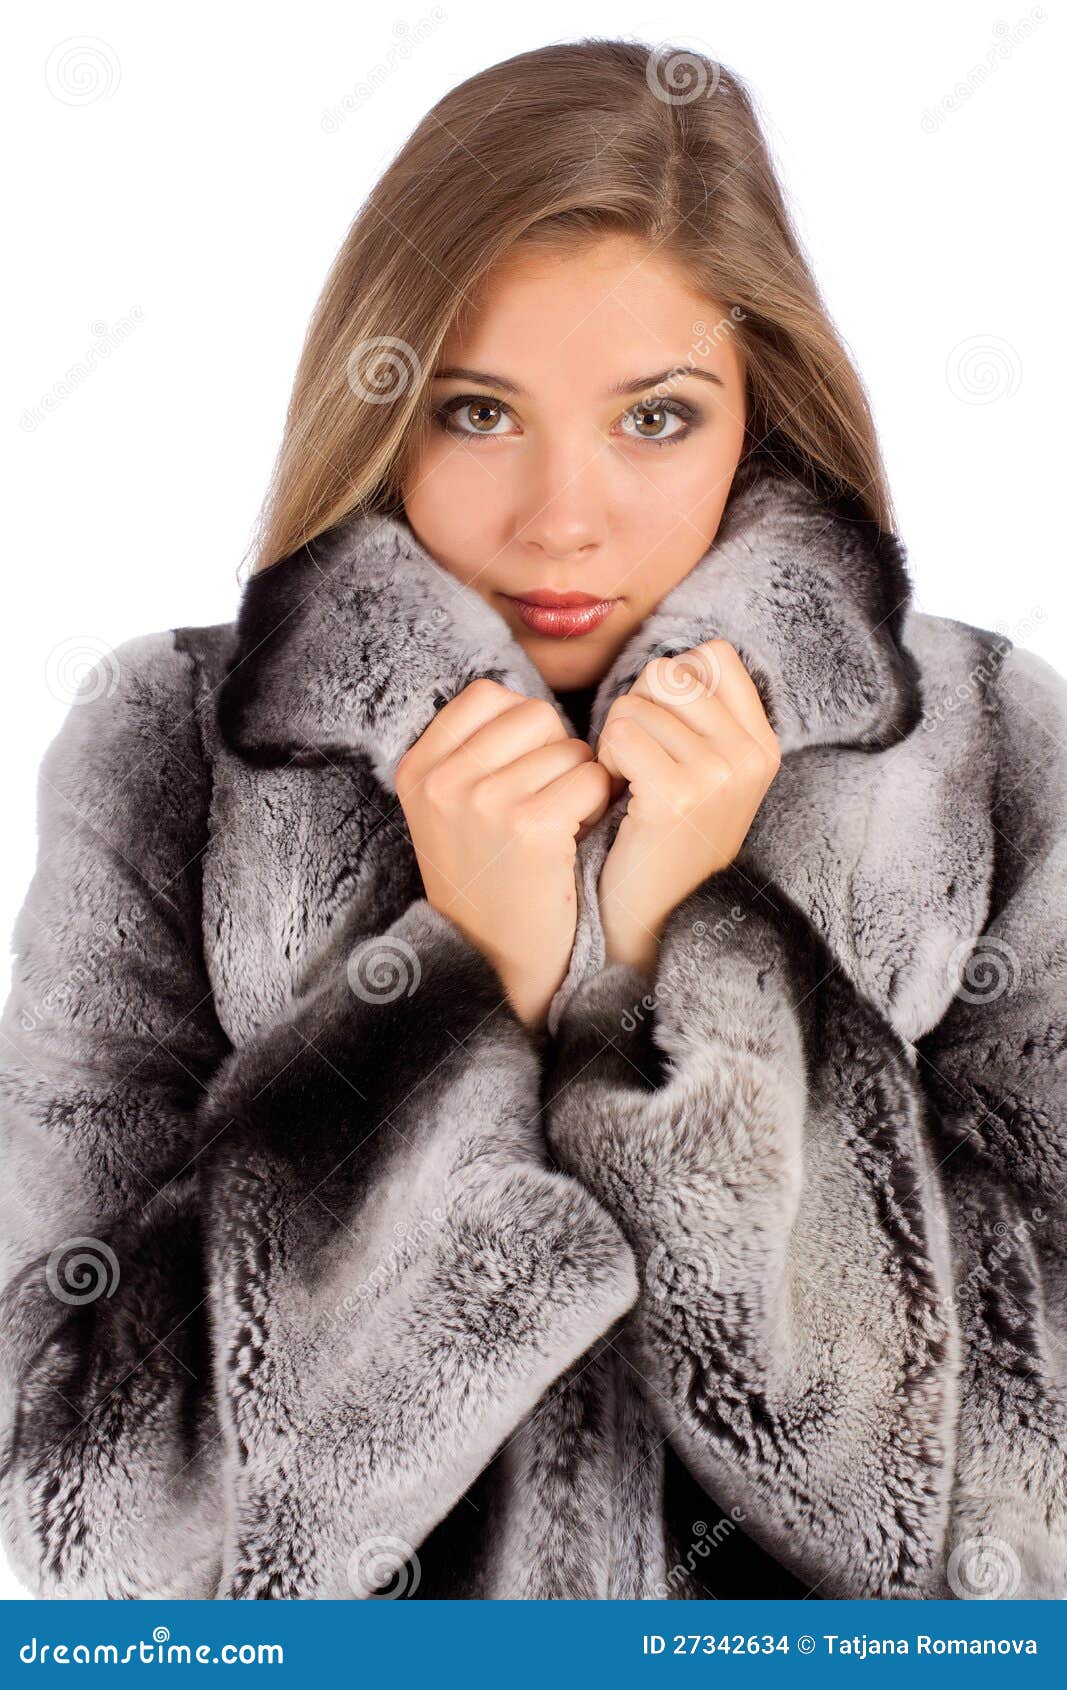 Young Woman In Luxury Fur Coat Stock Images - Image: 27342634